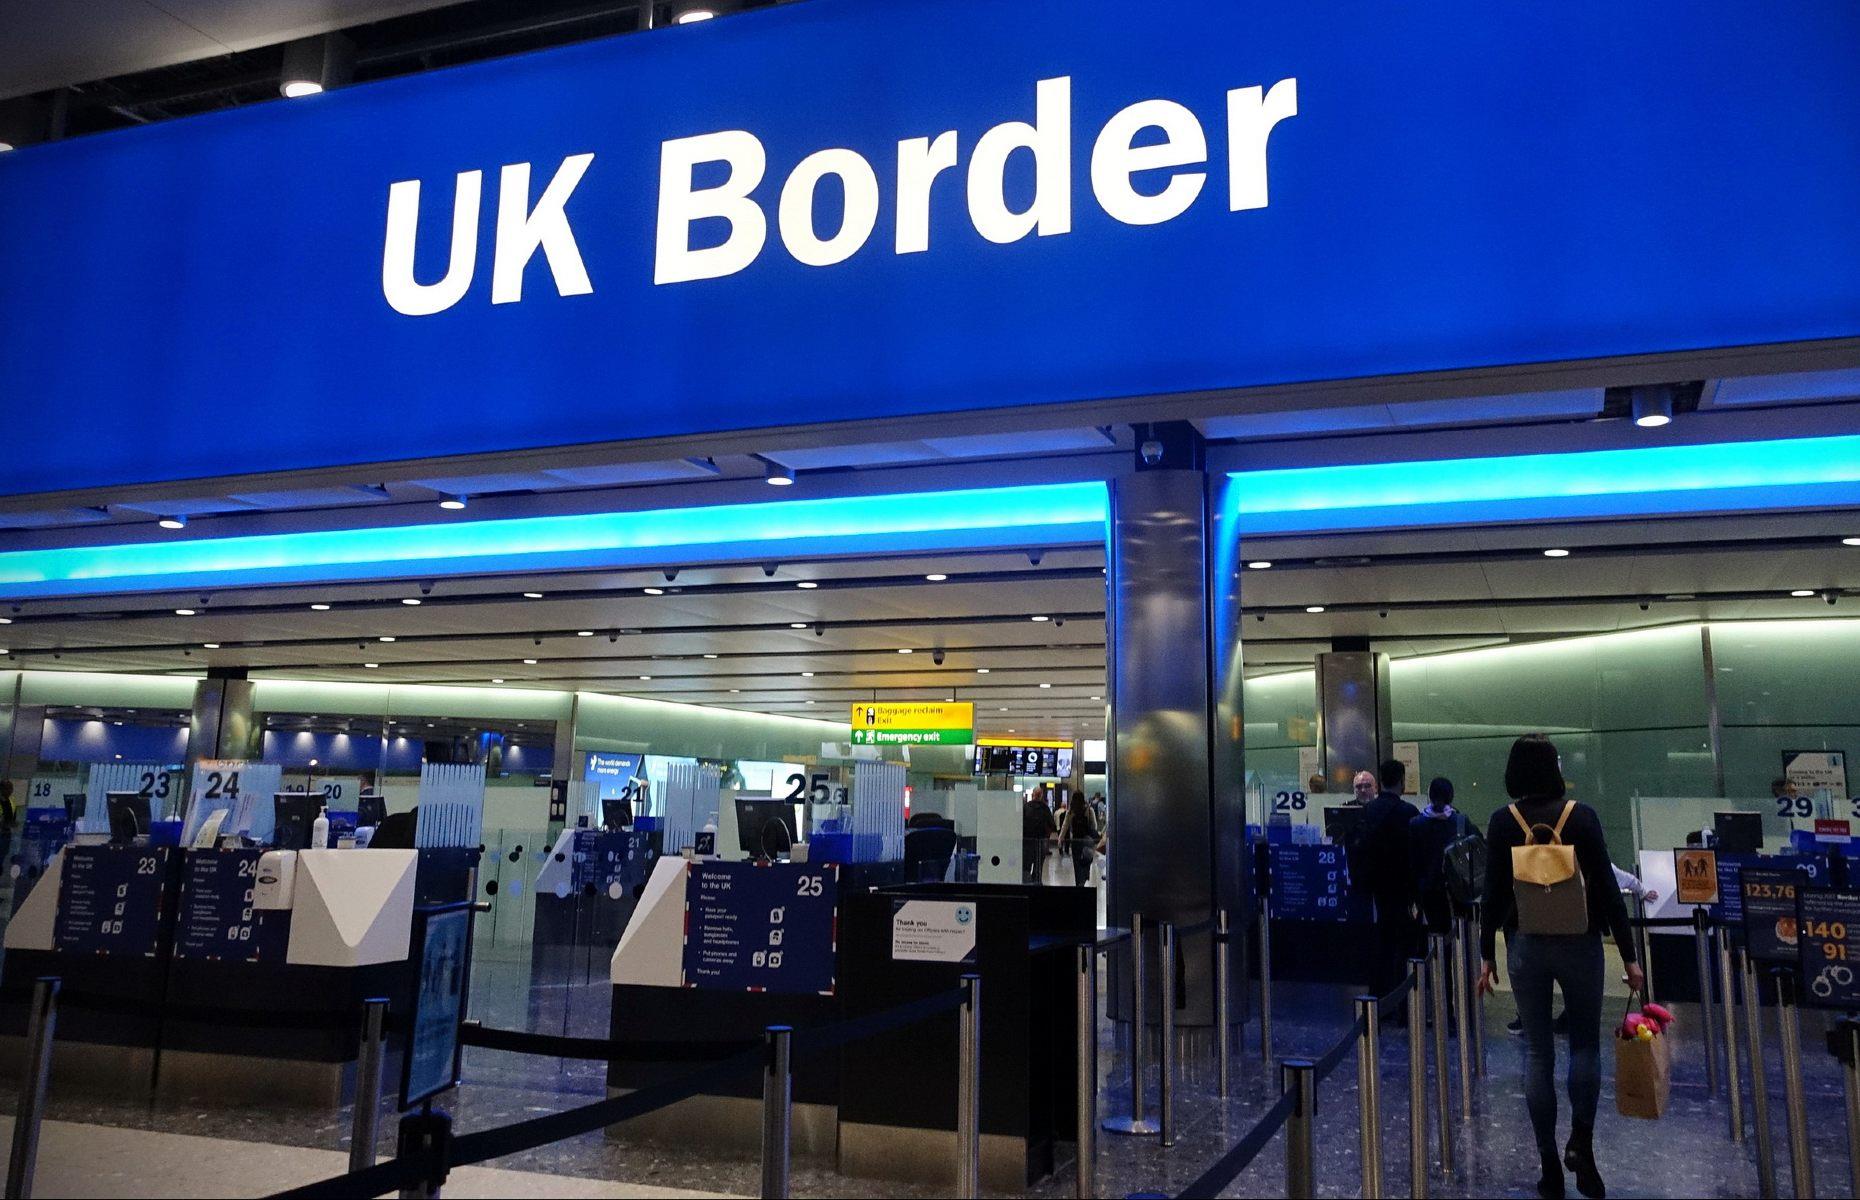 <p>As part of ongoing plans to digitise its borders, the UK is introducing a new Electronic Travel Authorisation (ETA) document that will be required for visa-free international visitors to England, Scotland, Wales and Northern Ireland. ETAs cost £10 (€12/$13) and are already mandatory for Qatari passport holders, with Bahrain, Jordan, Kuwait, Oman, Saudi Arabia and the UAE joining the scheme from February 2024. More countries, including the 27 European Union member states, the USA, Canada and Australia, are set to join later in 2024. More on the ETA process can be found in our <a href="https://www.loveexploring.com/news/190526/the-ultimate-guide-to-the-new-electronic-travel-authorisation-system">detailed explainer</a>.</p>